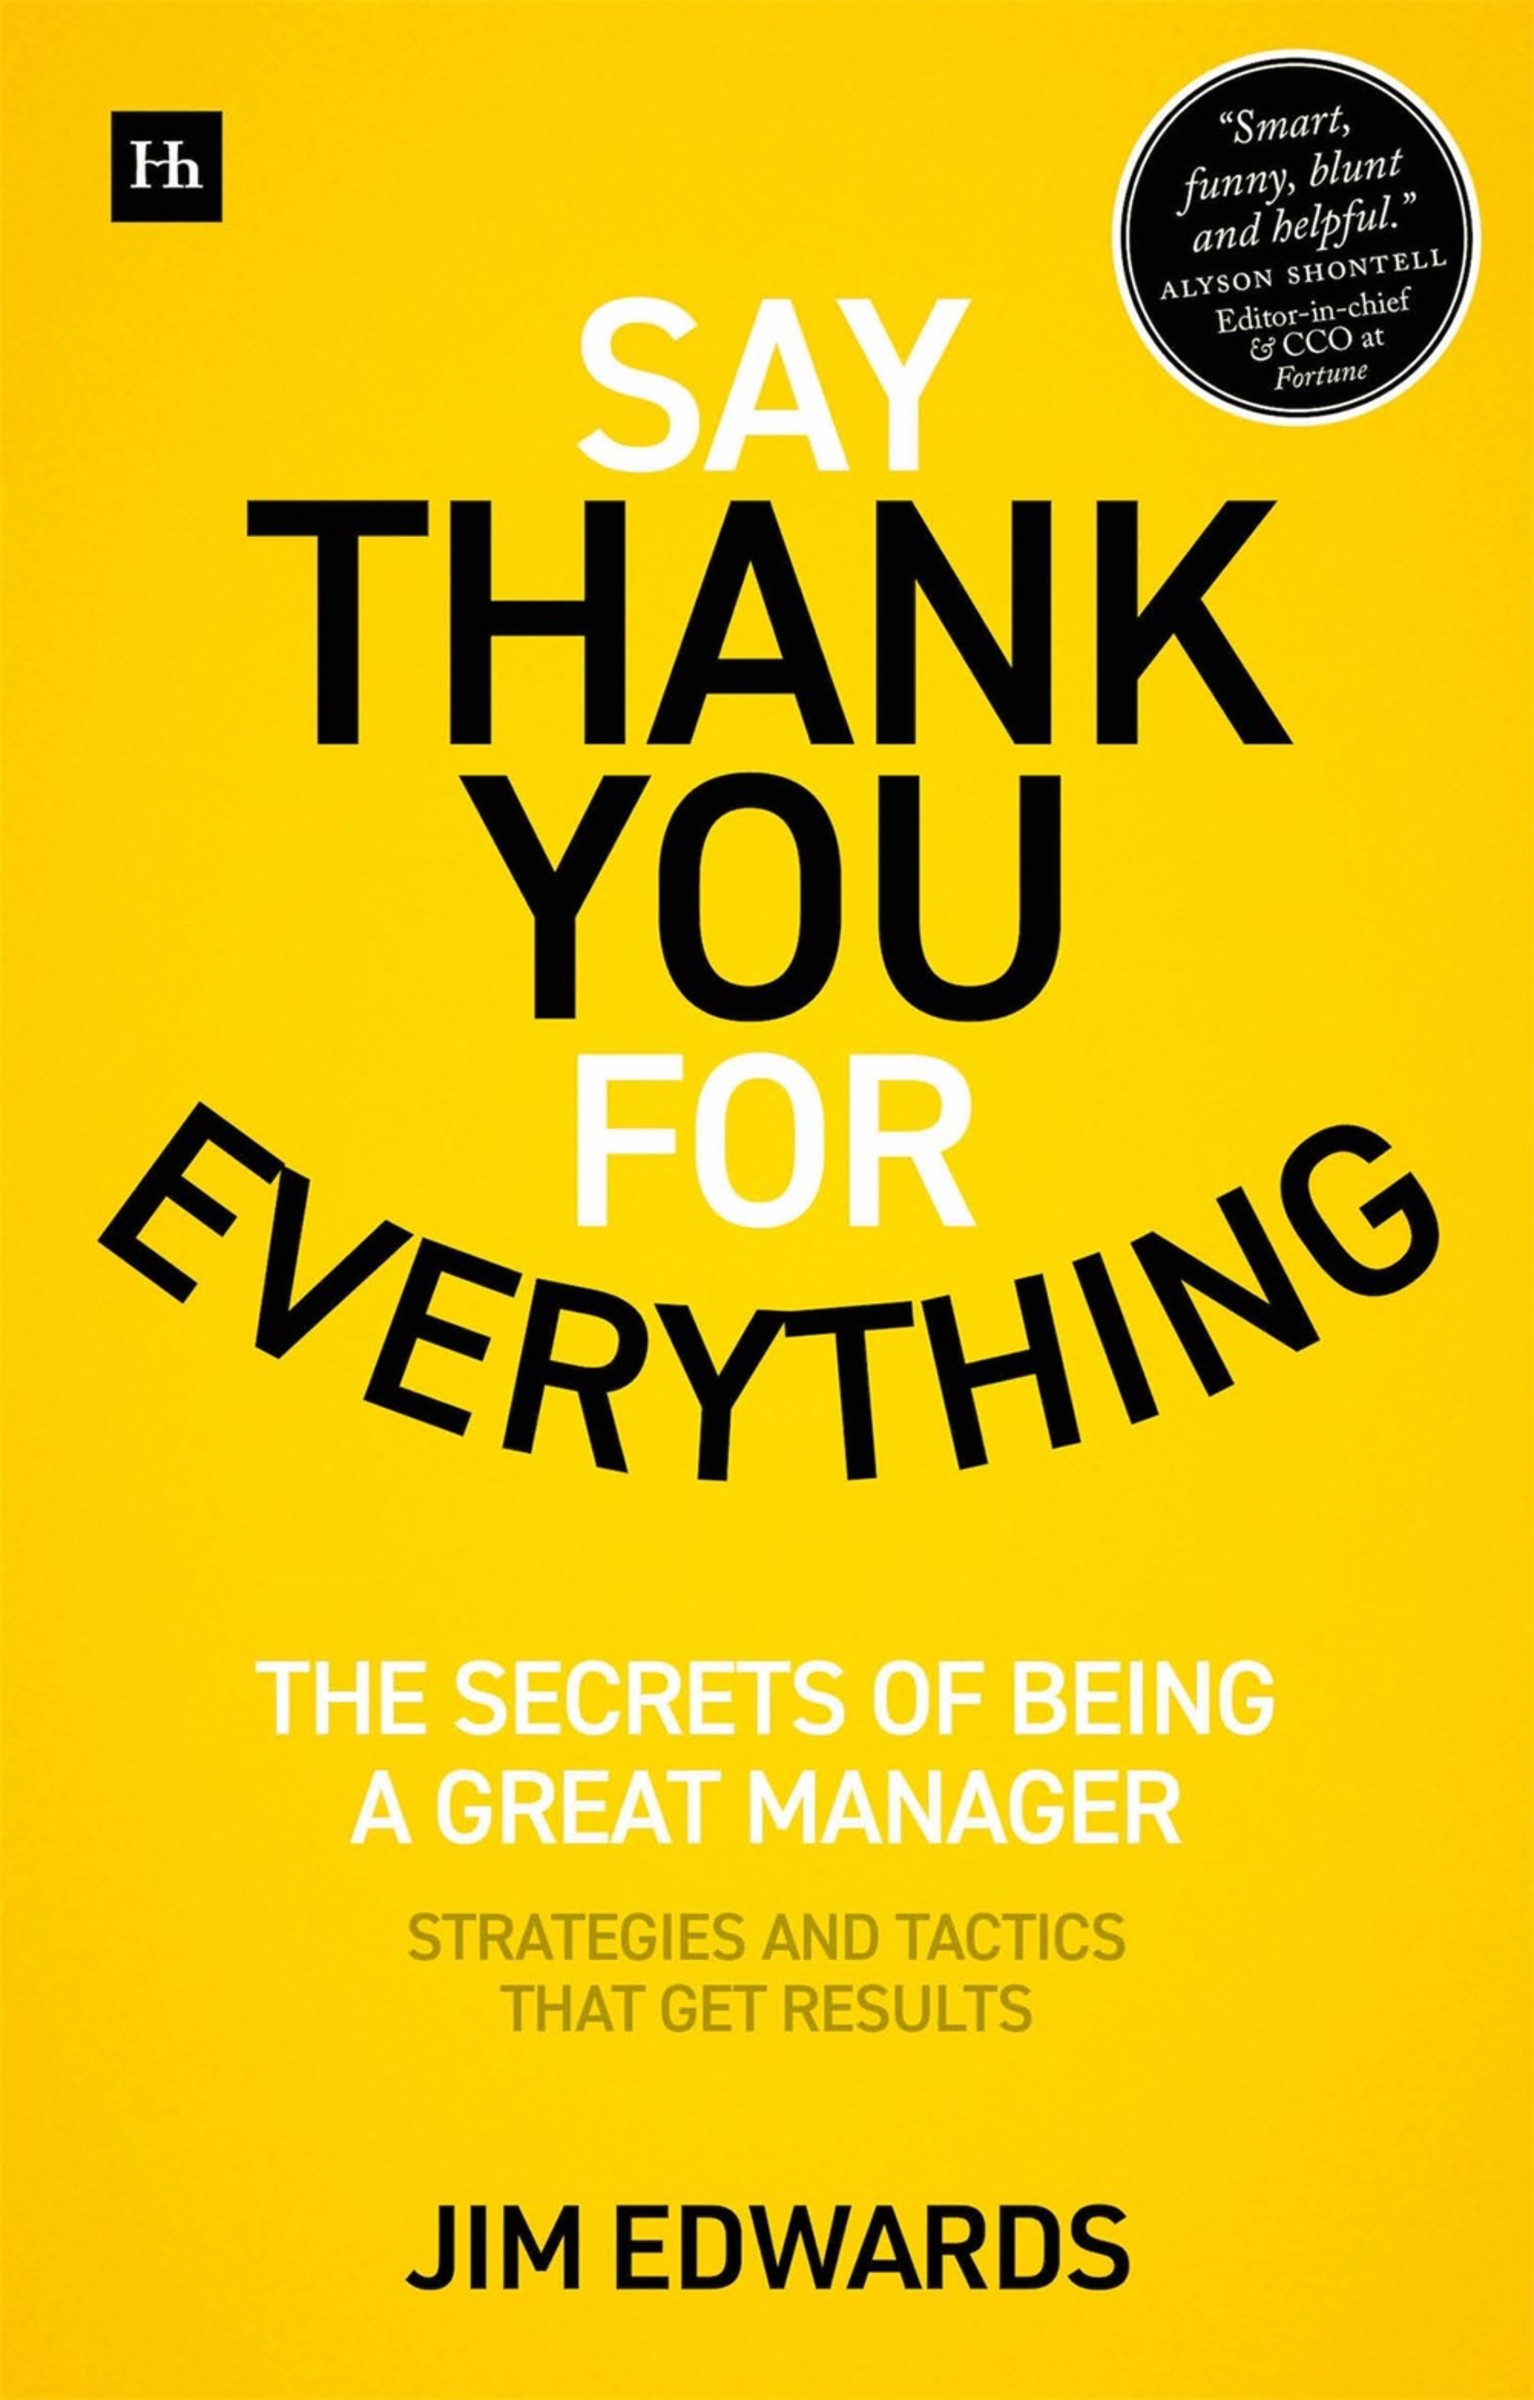 Say Thank You for Everything : The secrets of being a great manager - strategies and tactics that get results | Edwards, Jim